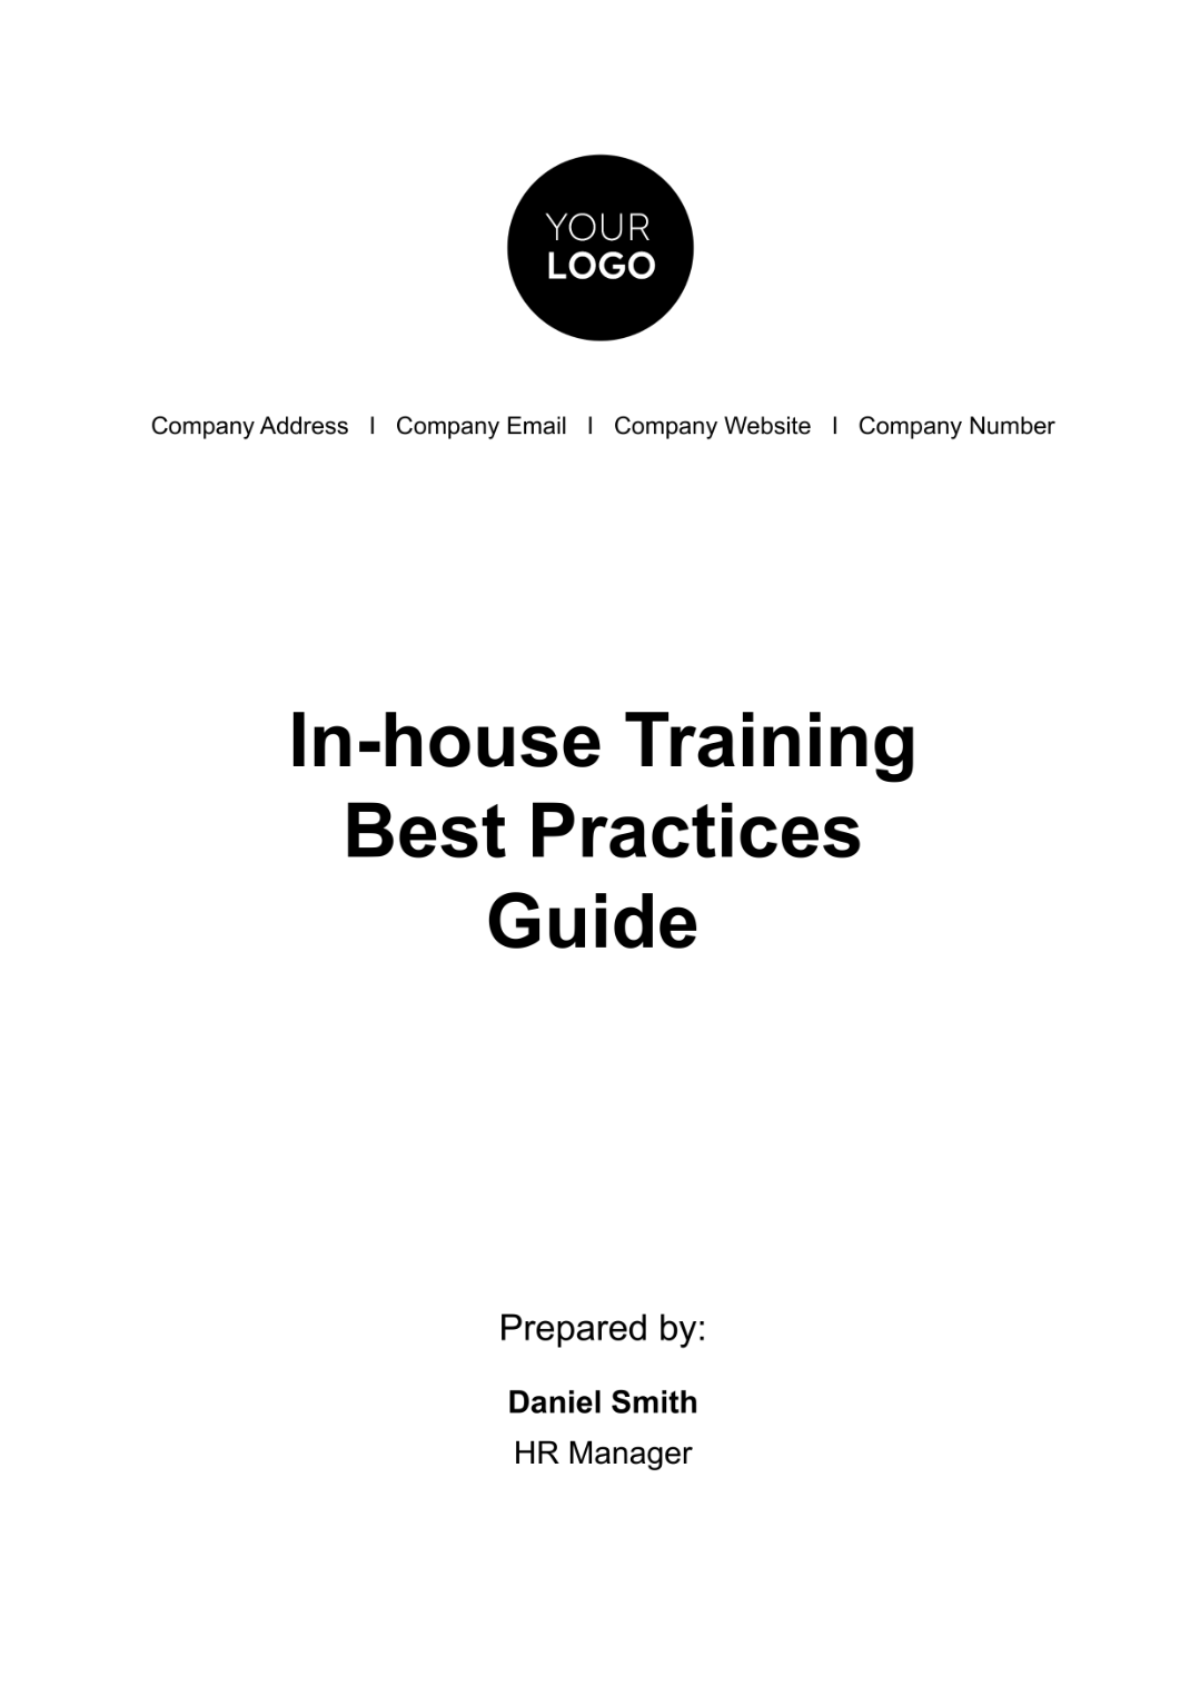 In-house Training Best Practices Guide HR Template